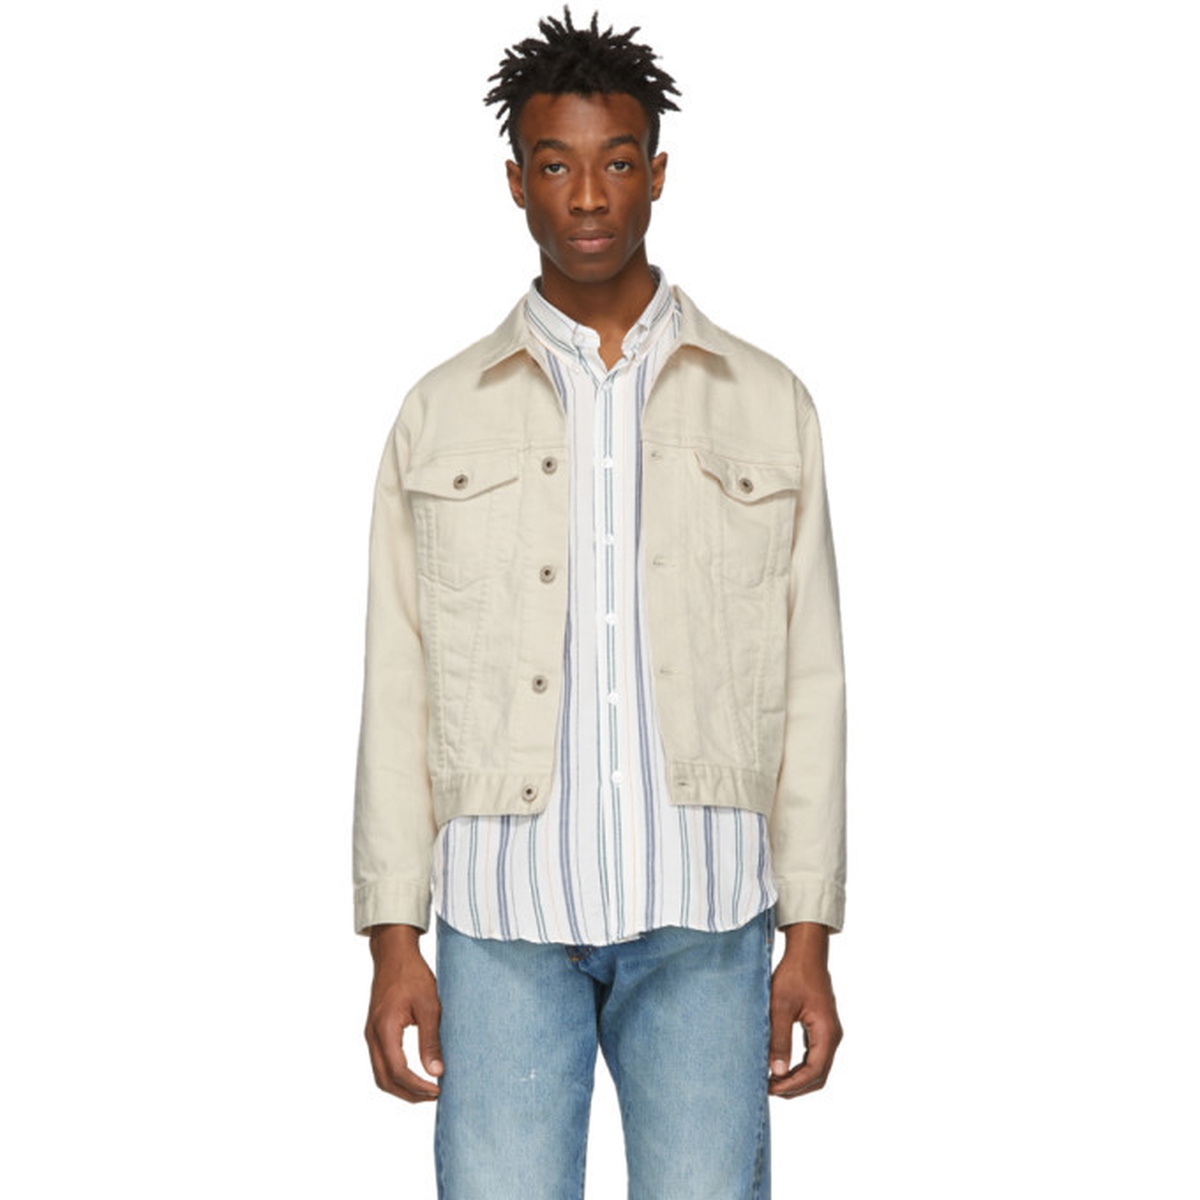 Naked and Famous Denim Off-White Denim Seed Jacket Naked and Famous Denim